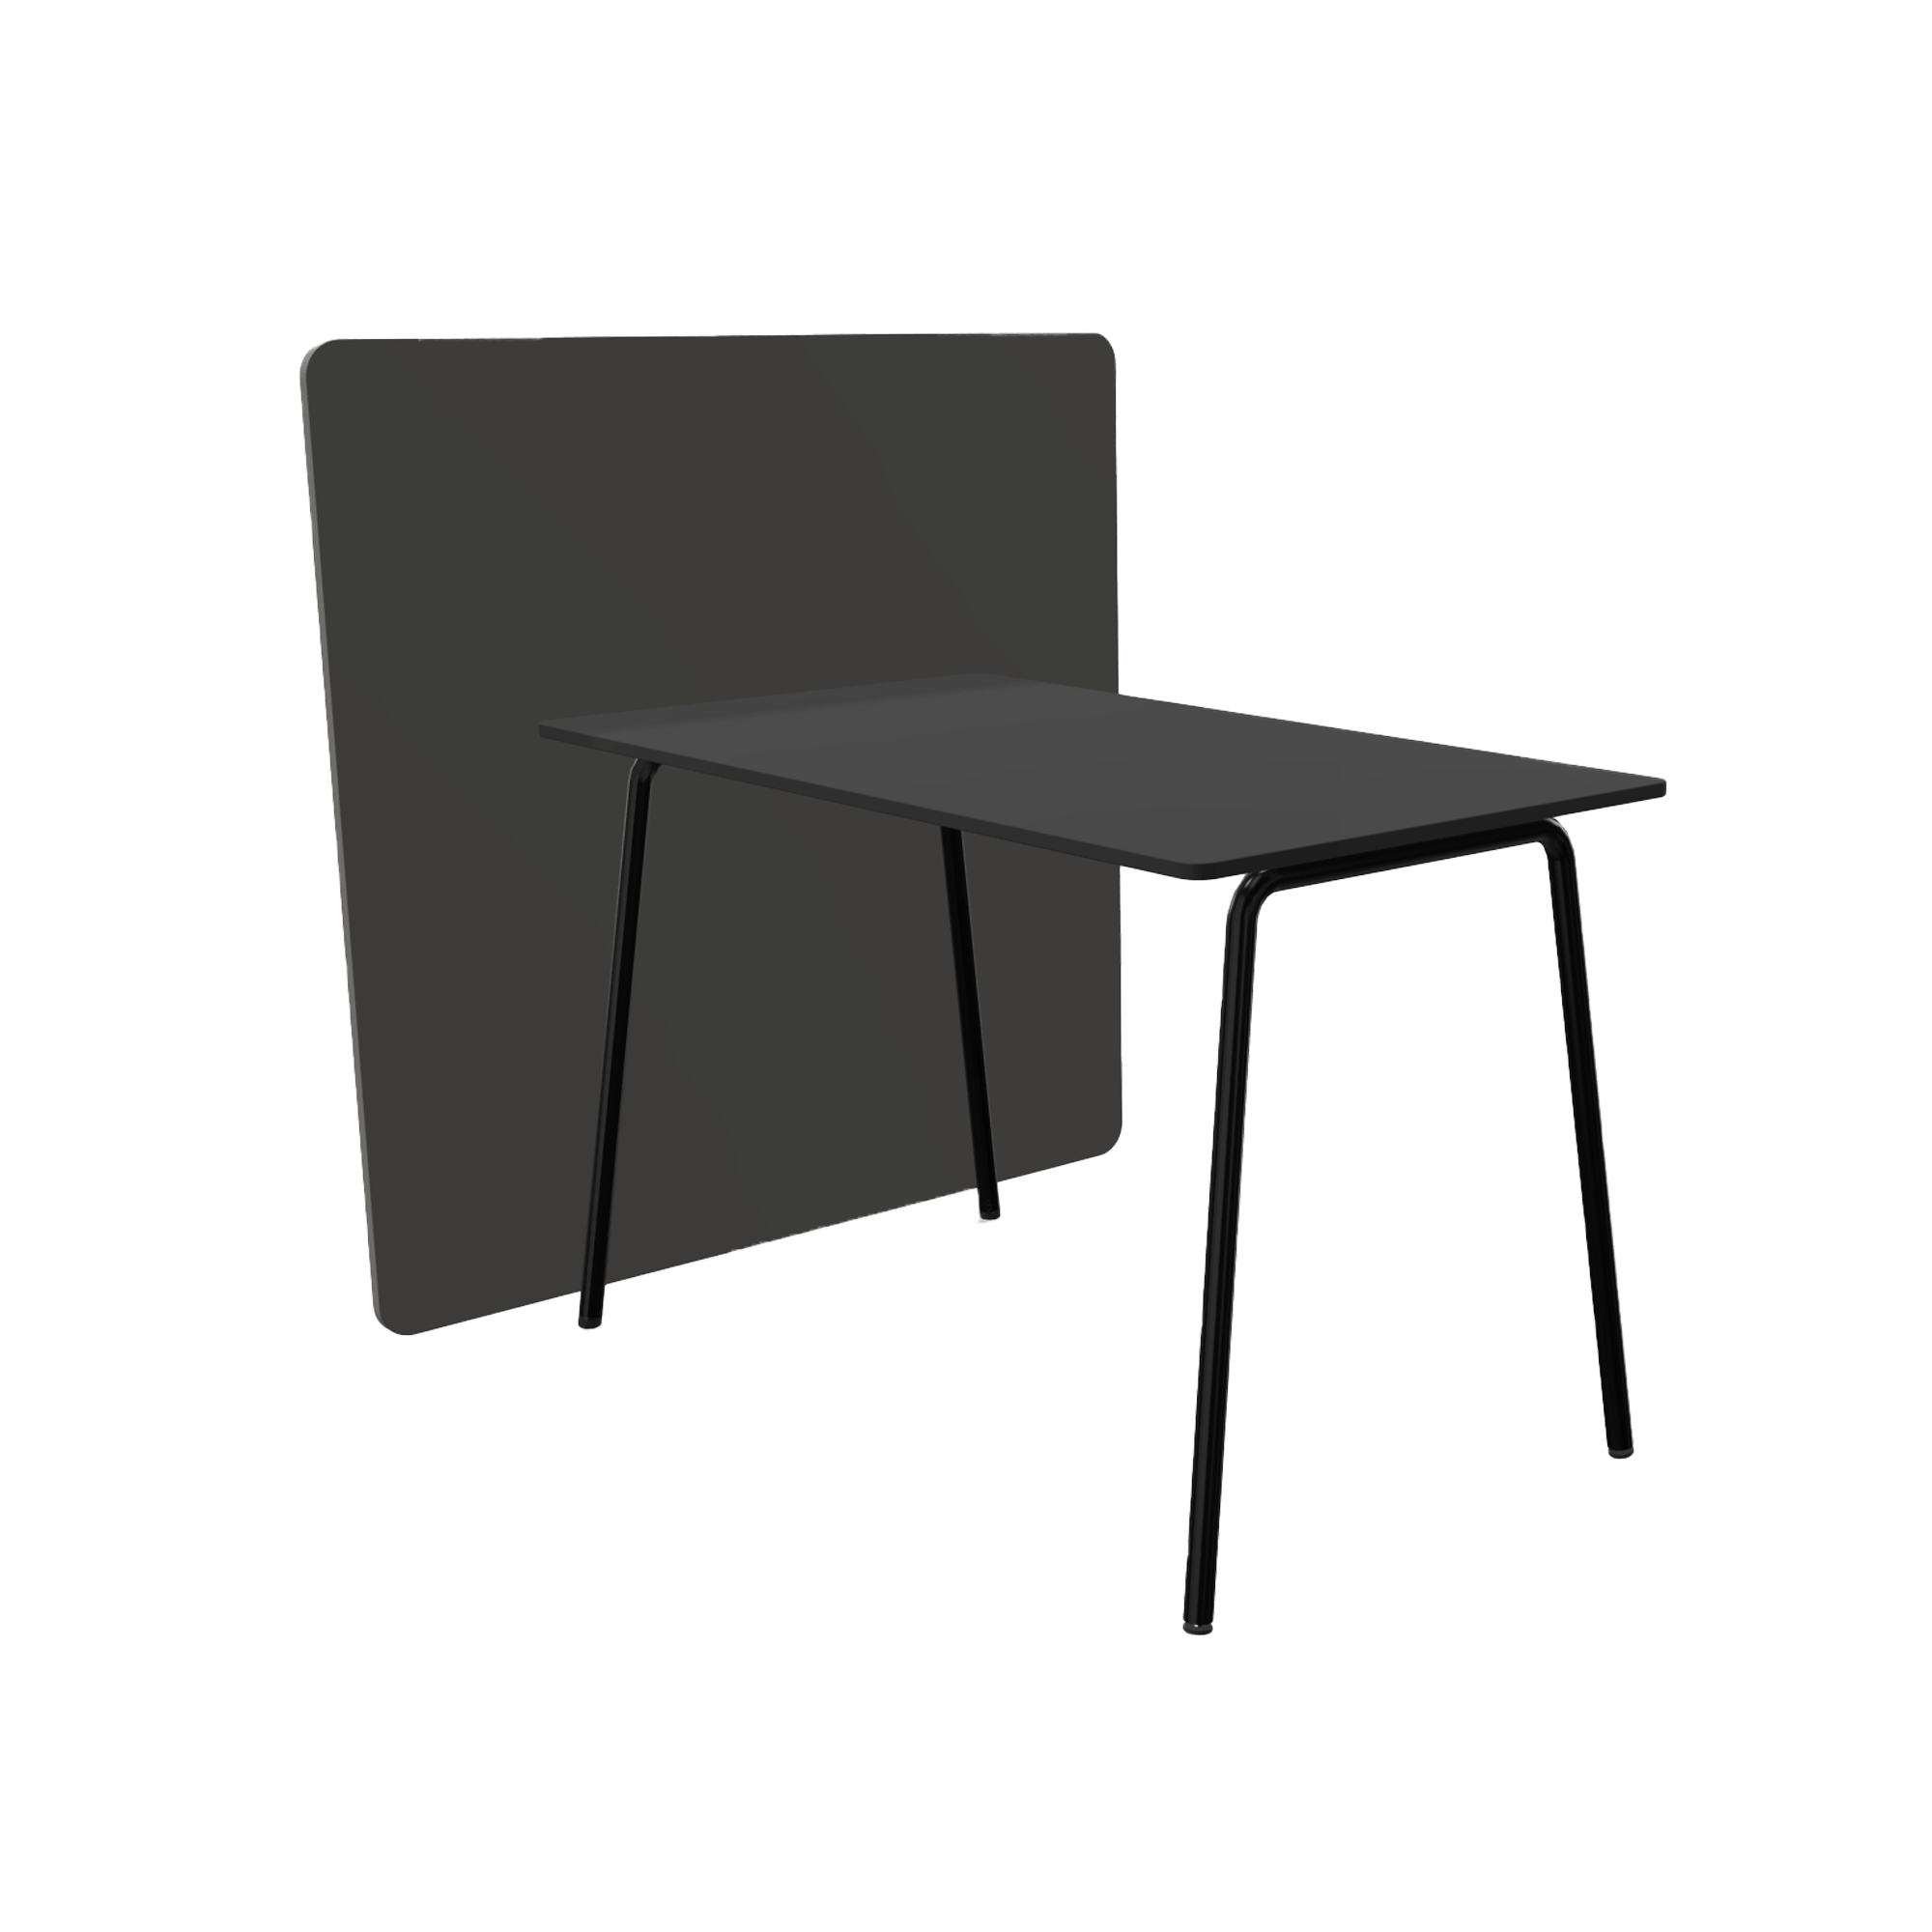 A black counter height rectangular table with black legs and a black office screen divider attached to one side